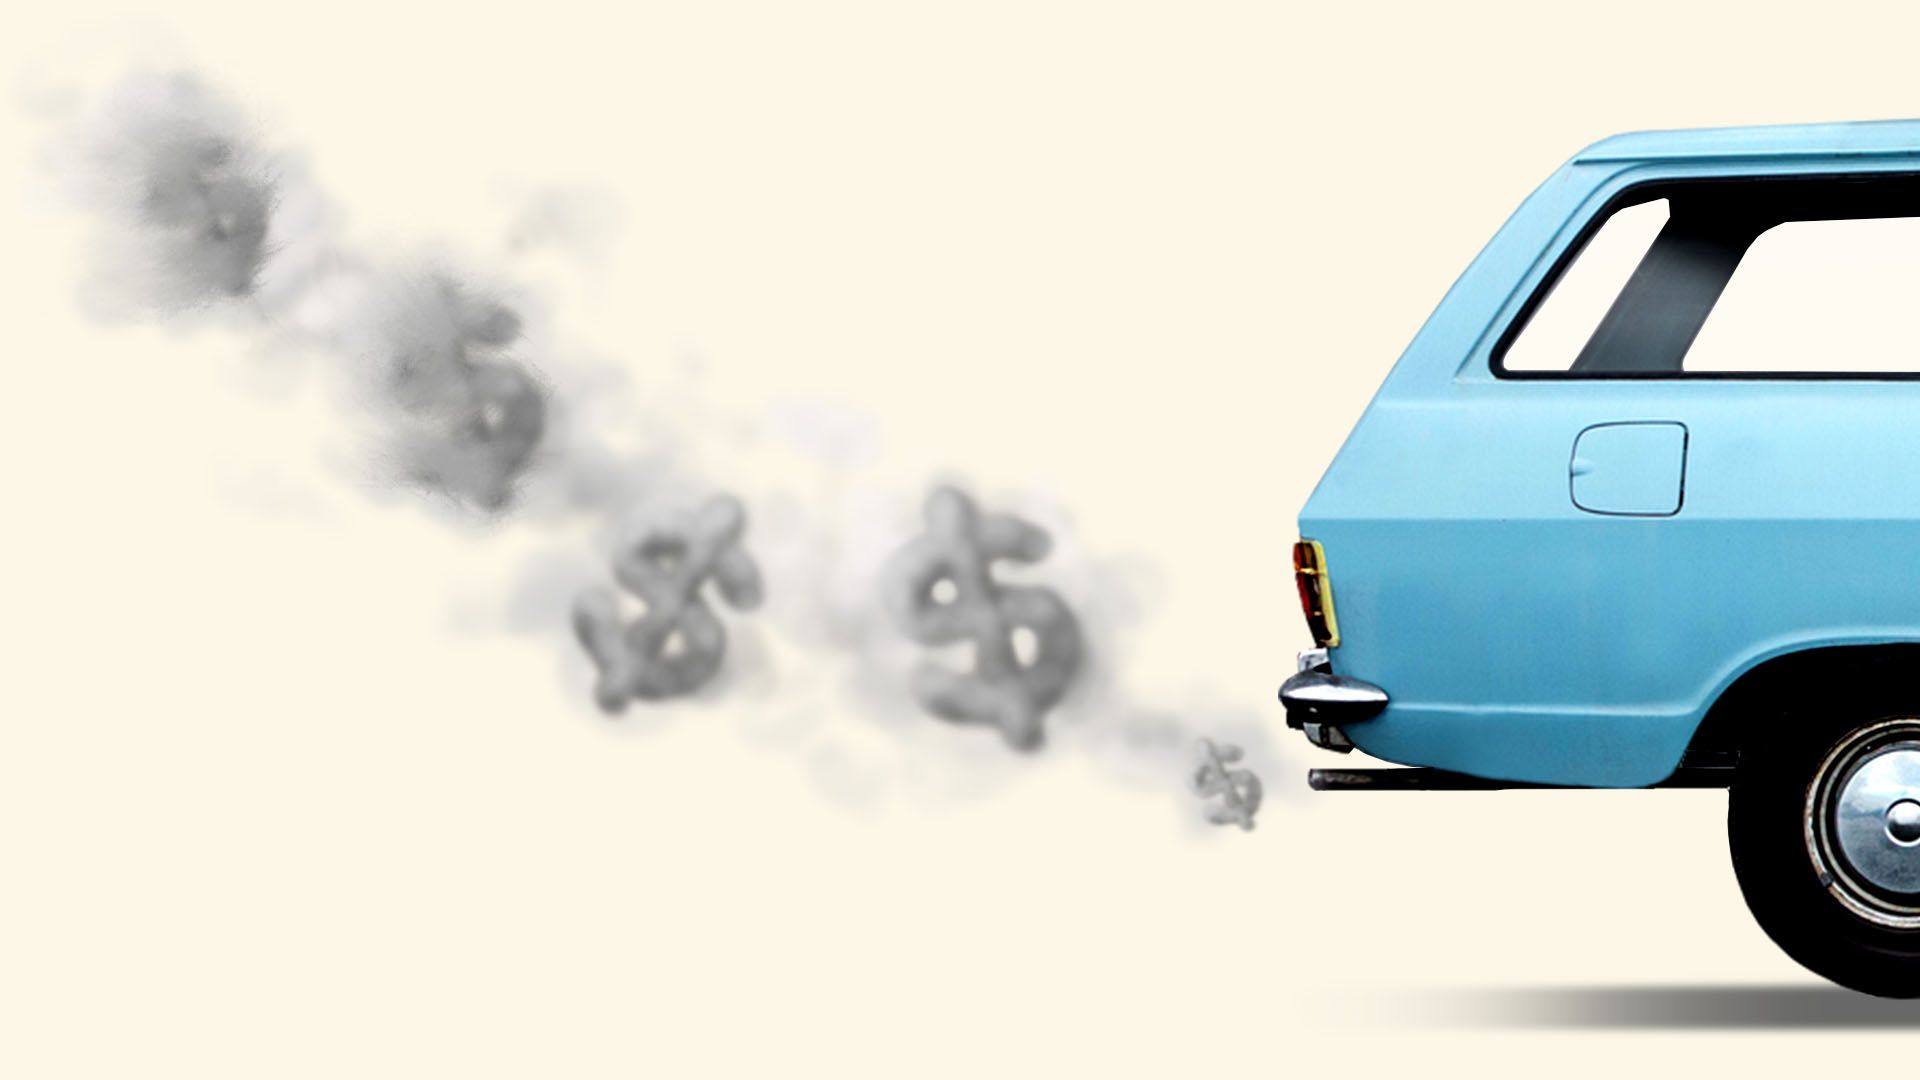 Illustration of a car with exhaust in the shape of dollar signs